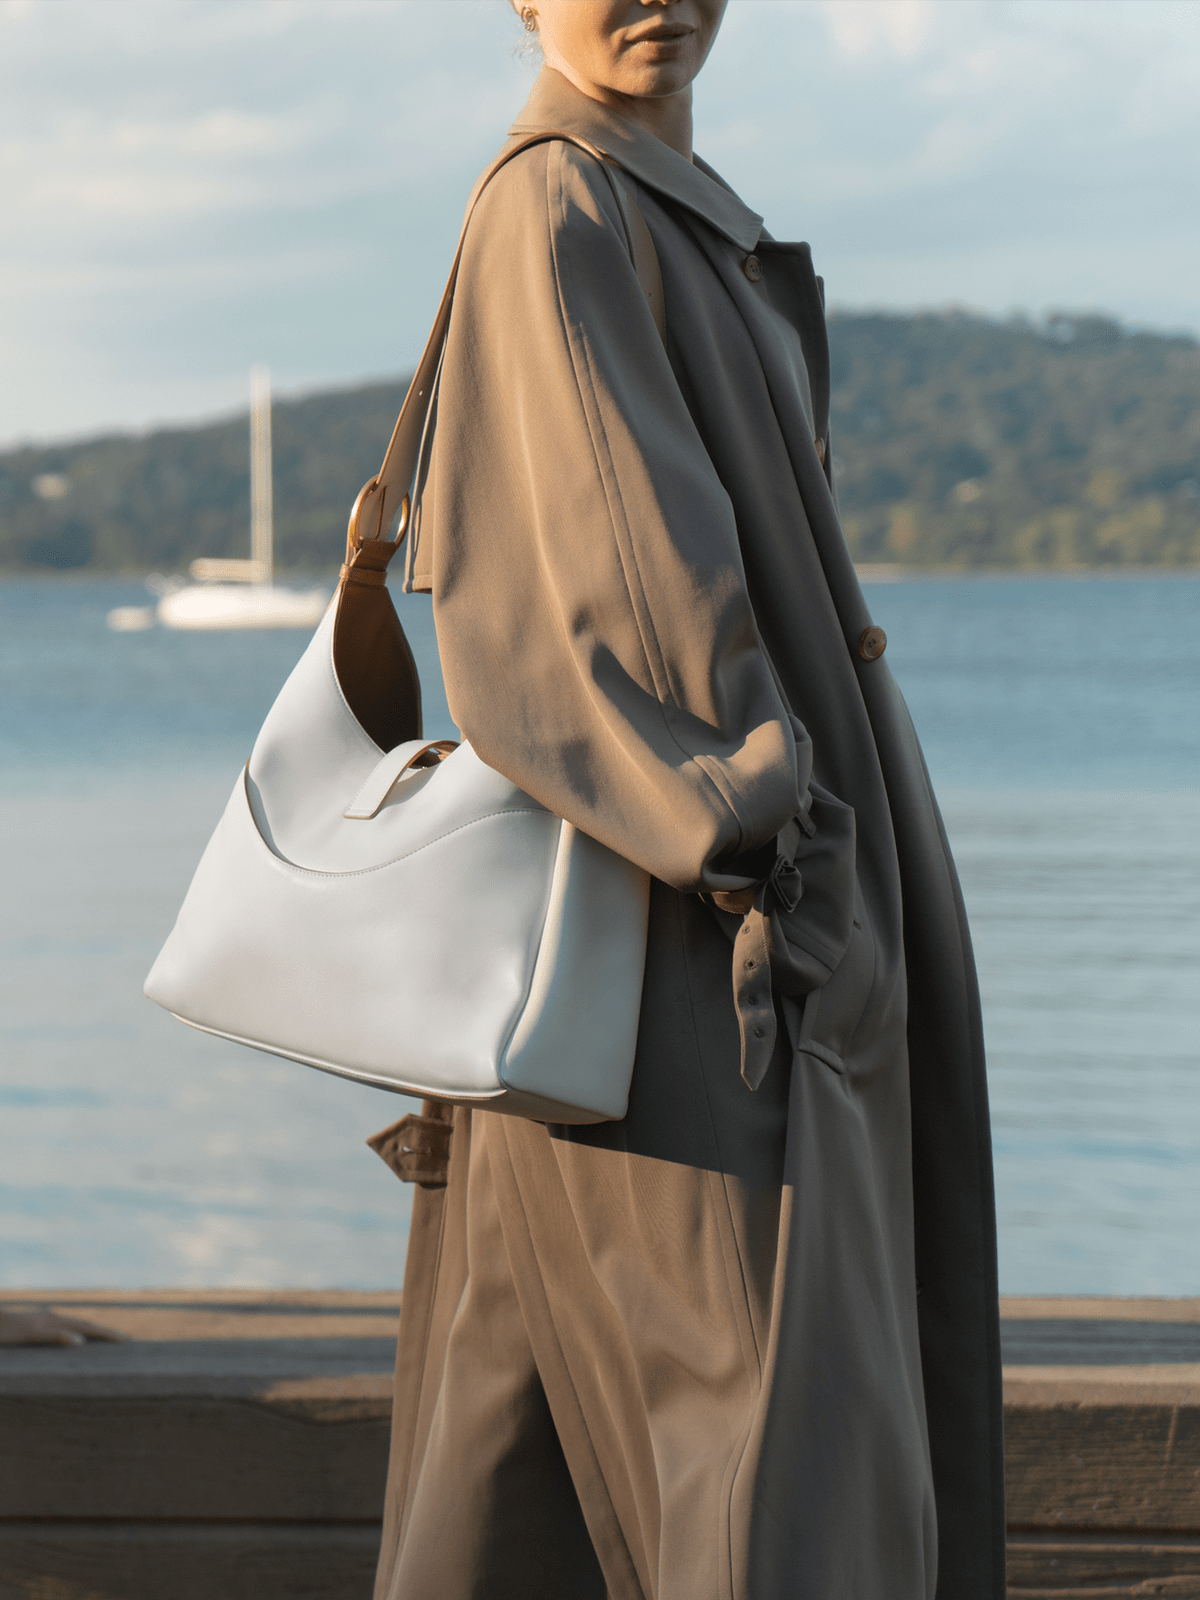 Shop the timeless Longchamp Le Pliage tote bag on sale for $100